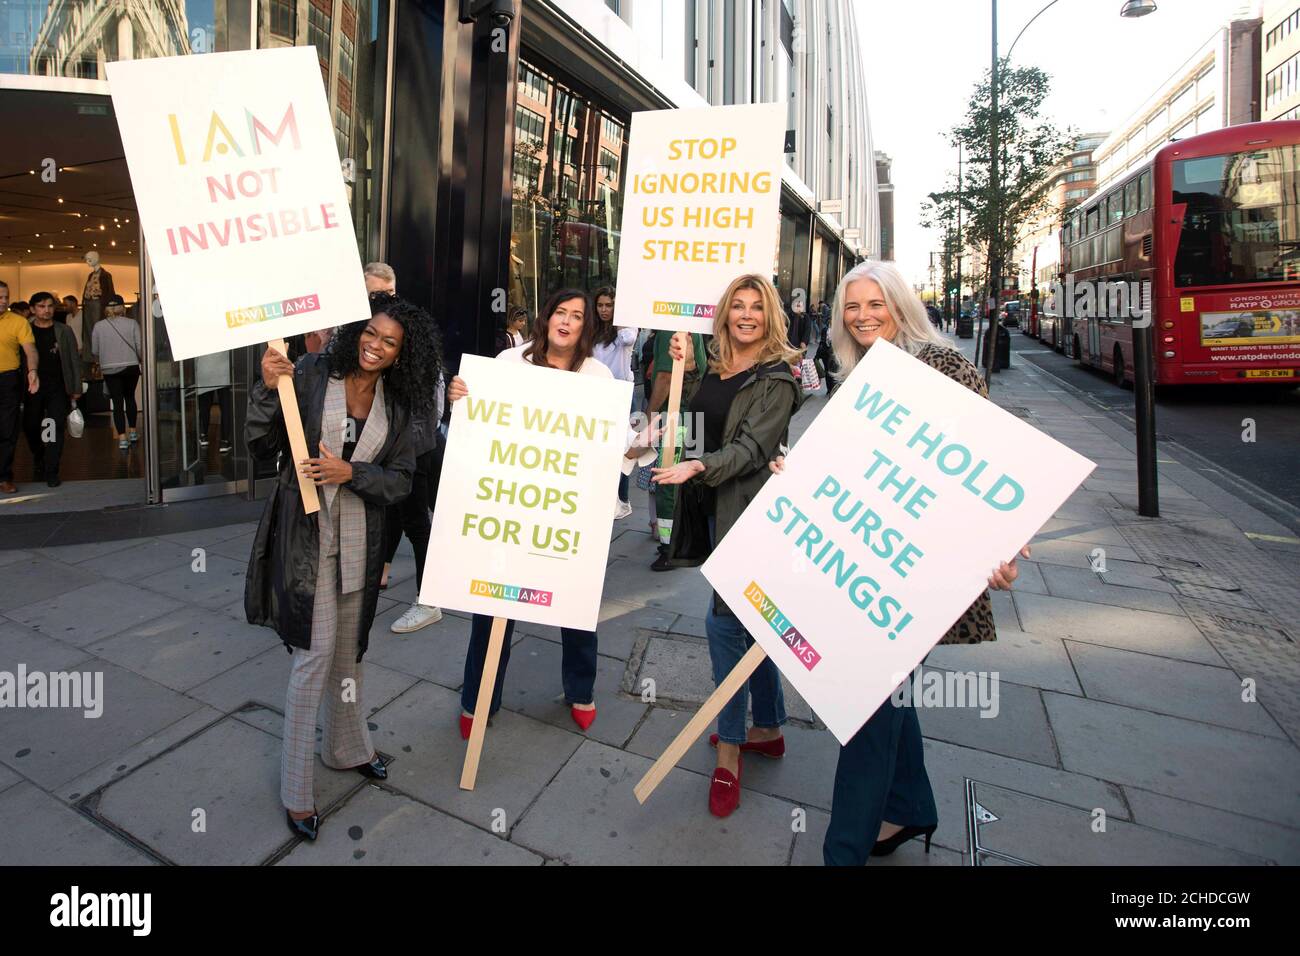 (left to right) Melanie Torino, aged 50, Kay Boggett, aged 44, Jilly Johnson, aged 64 and Rachel Peru, aged 47 on Oxford Street in a protest against the lack of offering on UK high streets for older women, ahead of the JD Williams Midster catwalk, in London. Stock Photo